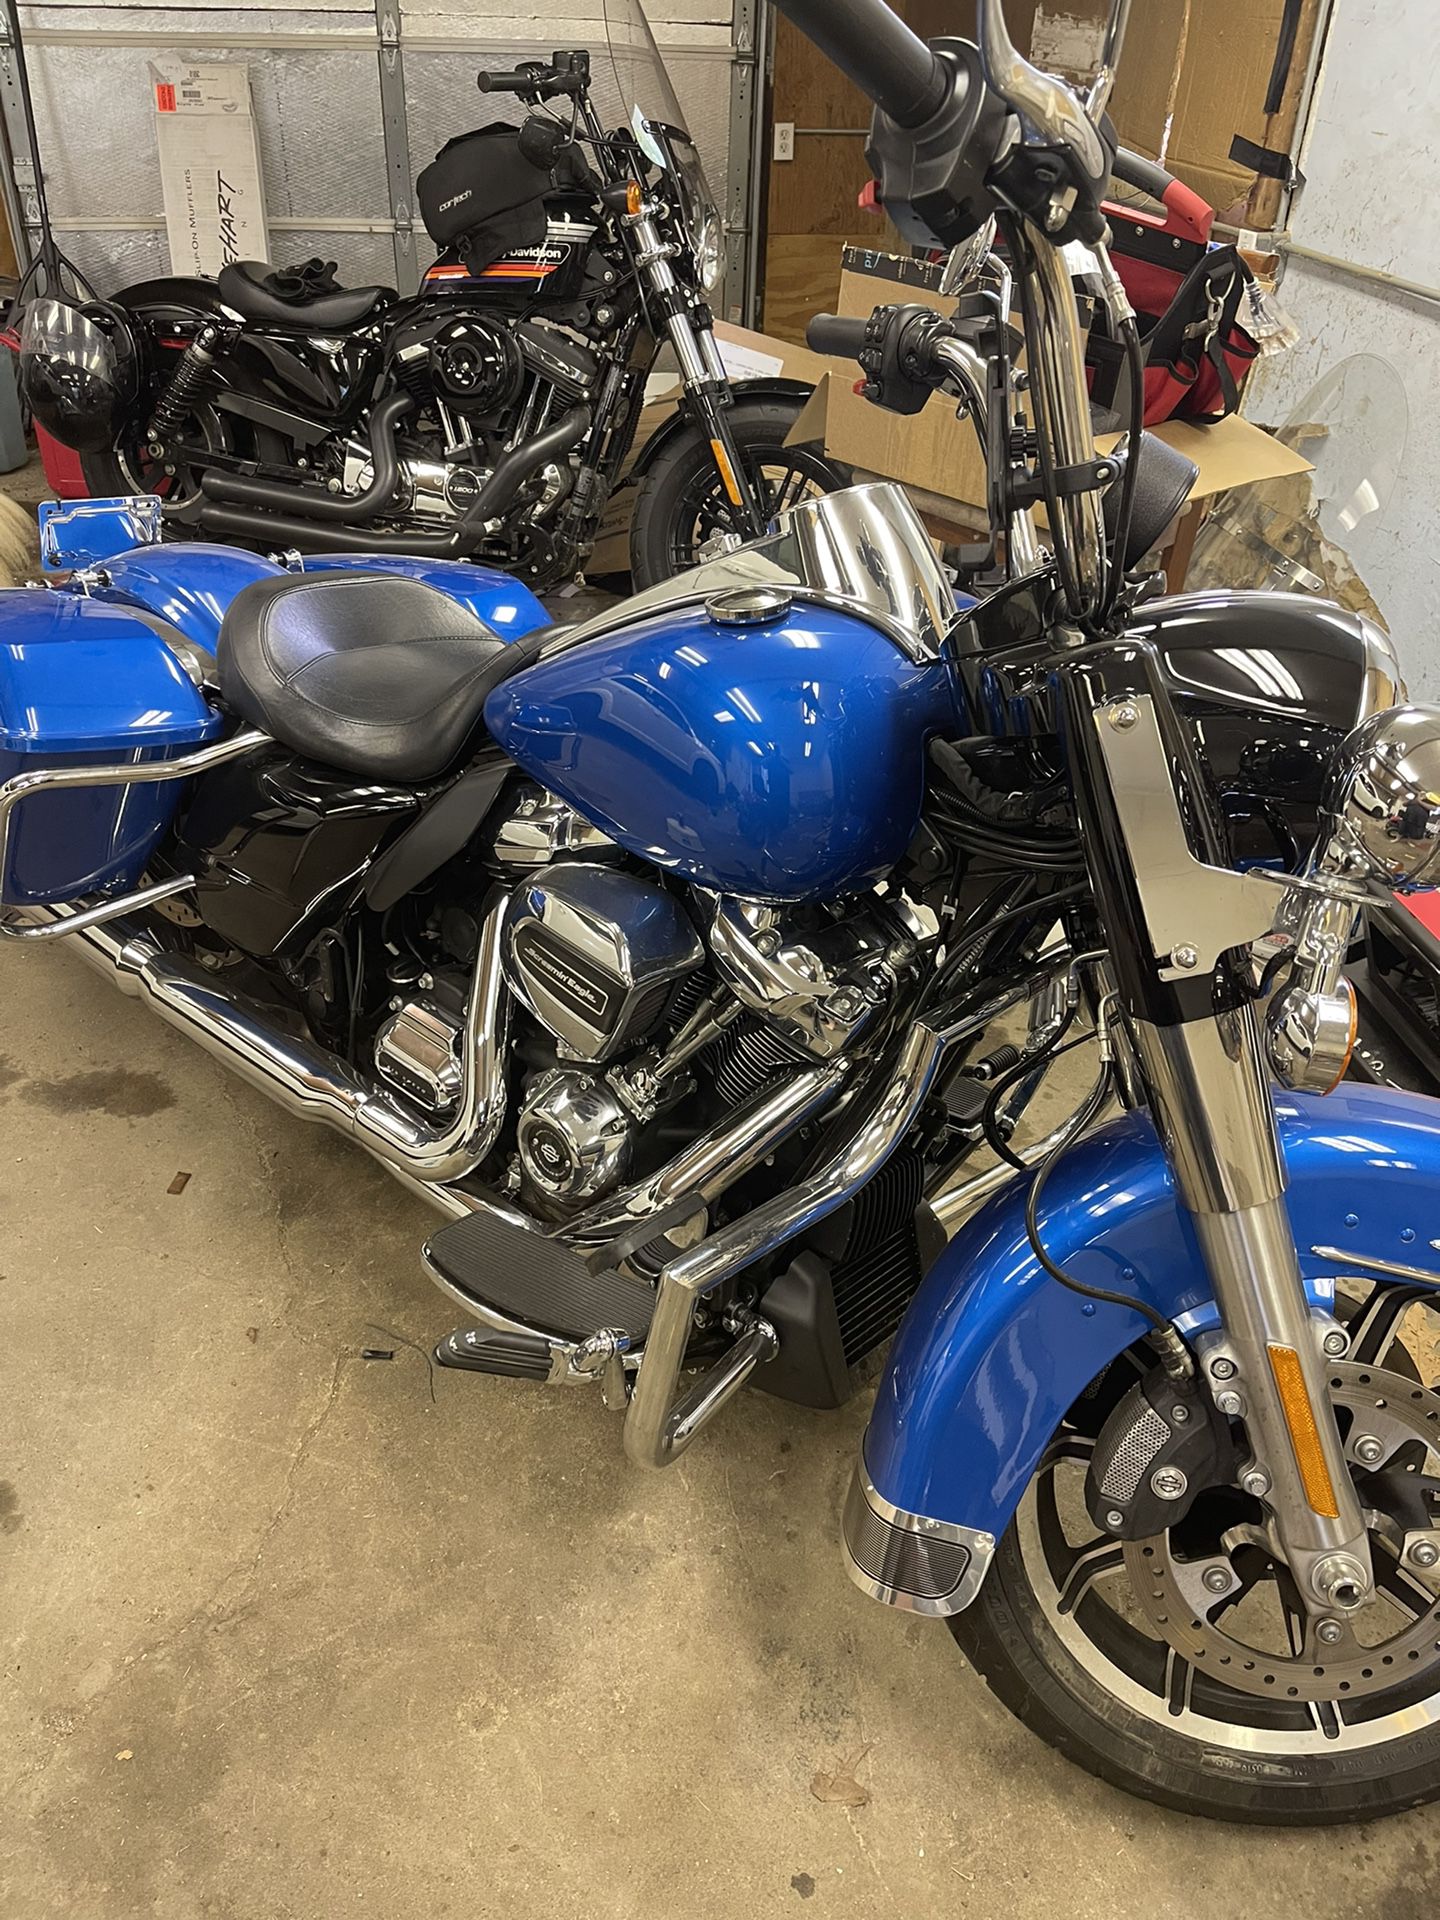 2020 RoadKing Police With Stage 2 Screaming Eagle Upgrade 